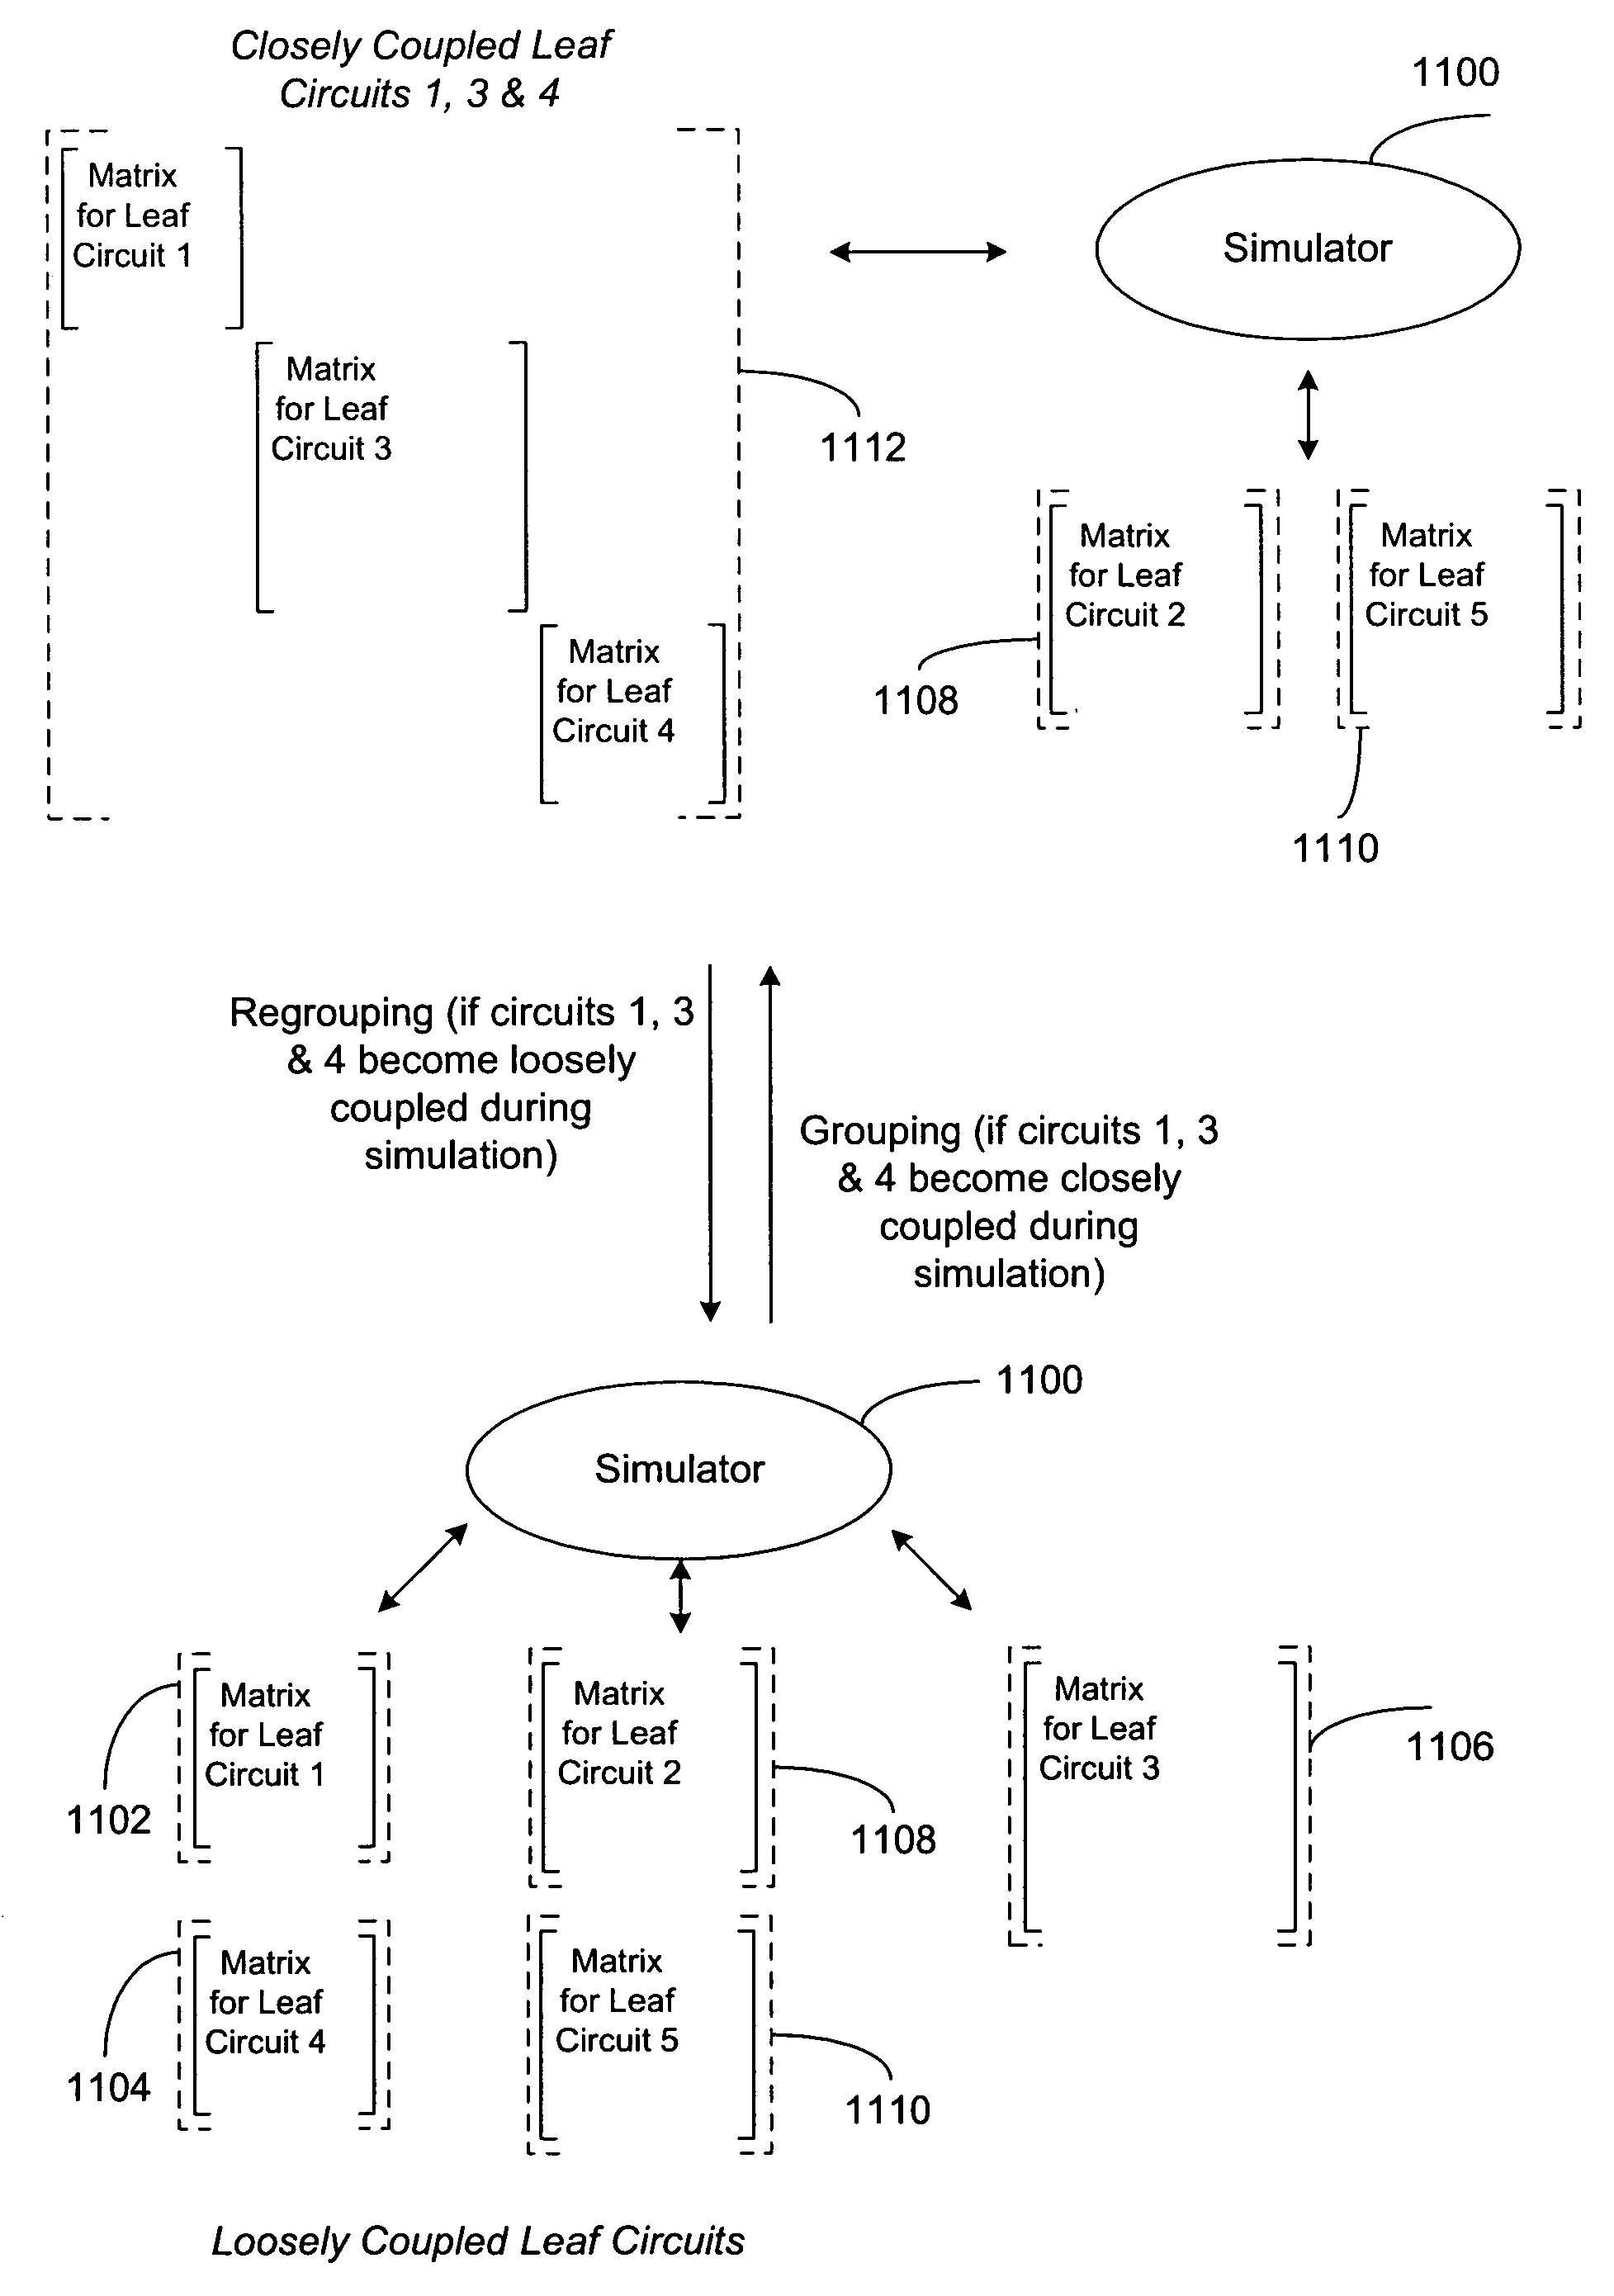 System and method for adaptive partitioning of circuit components during simulation